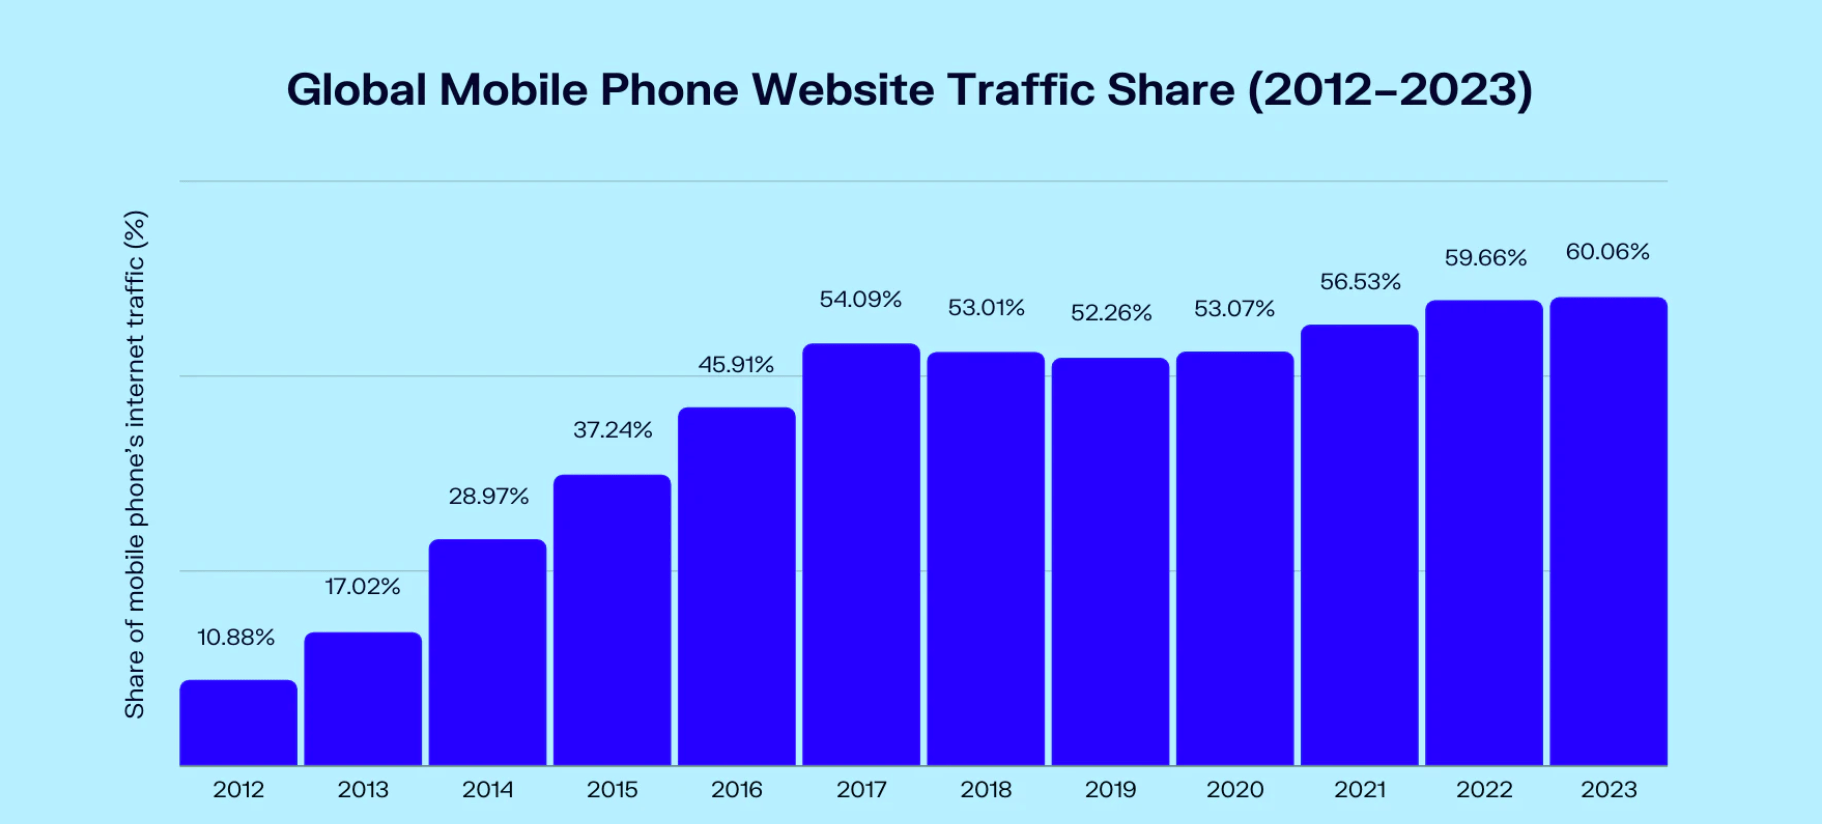 Bar graph showing the rising share of global mobile traffic from 10.88% in 2012 to 60.06% in 2023.